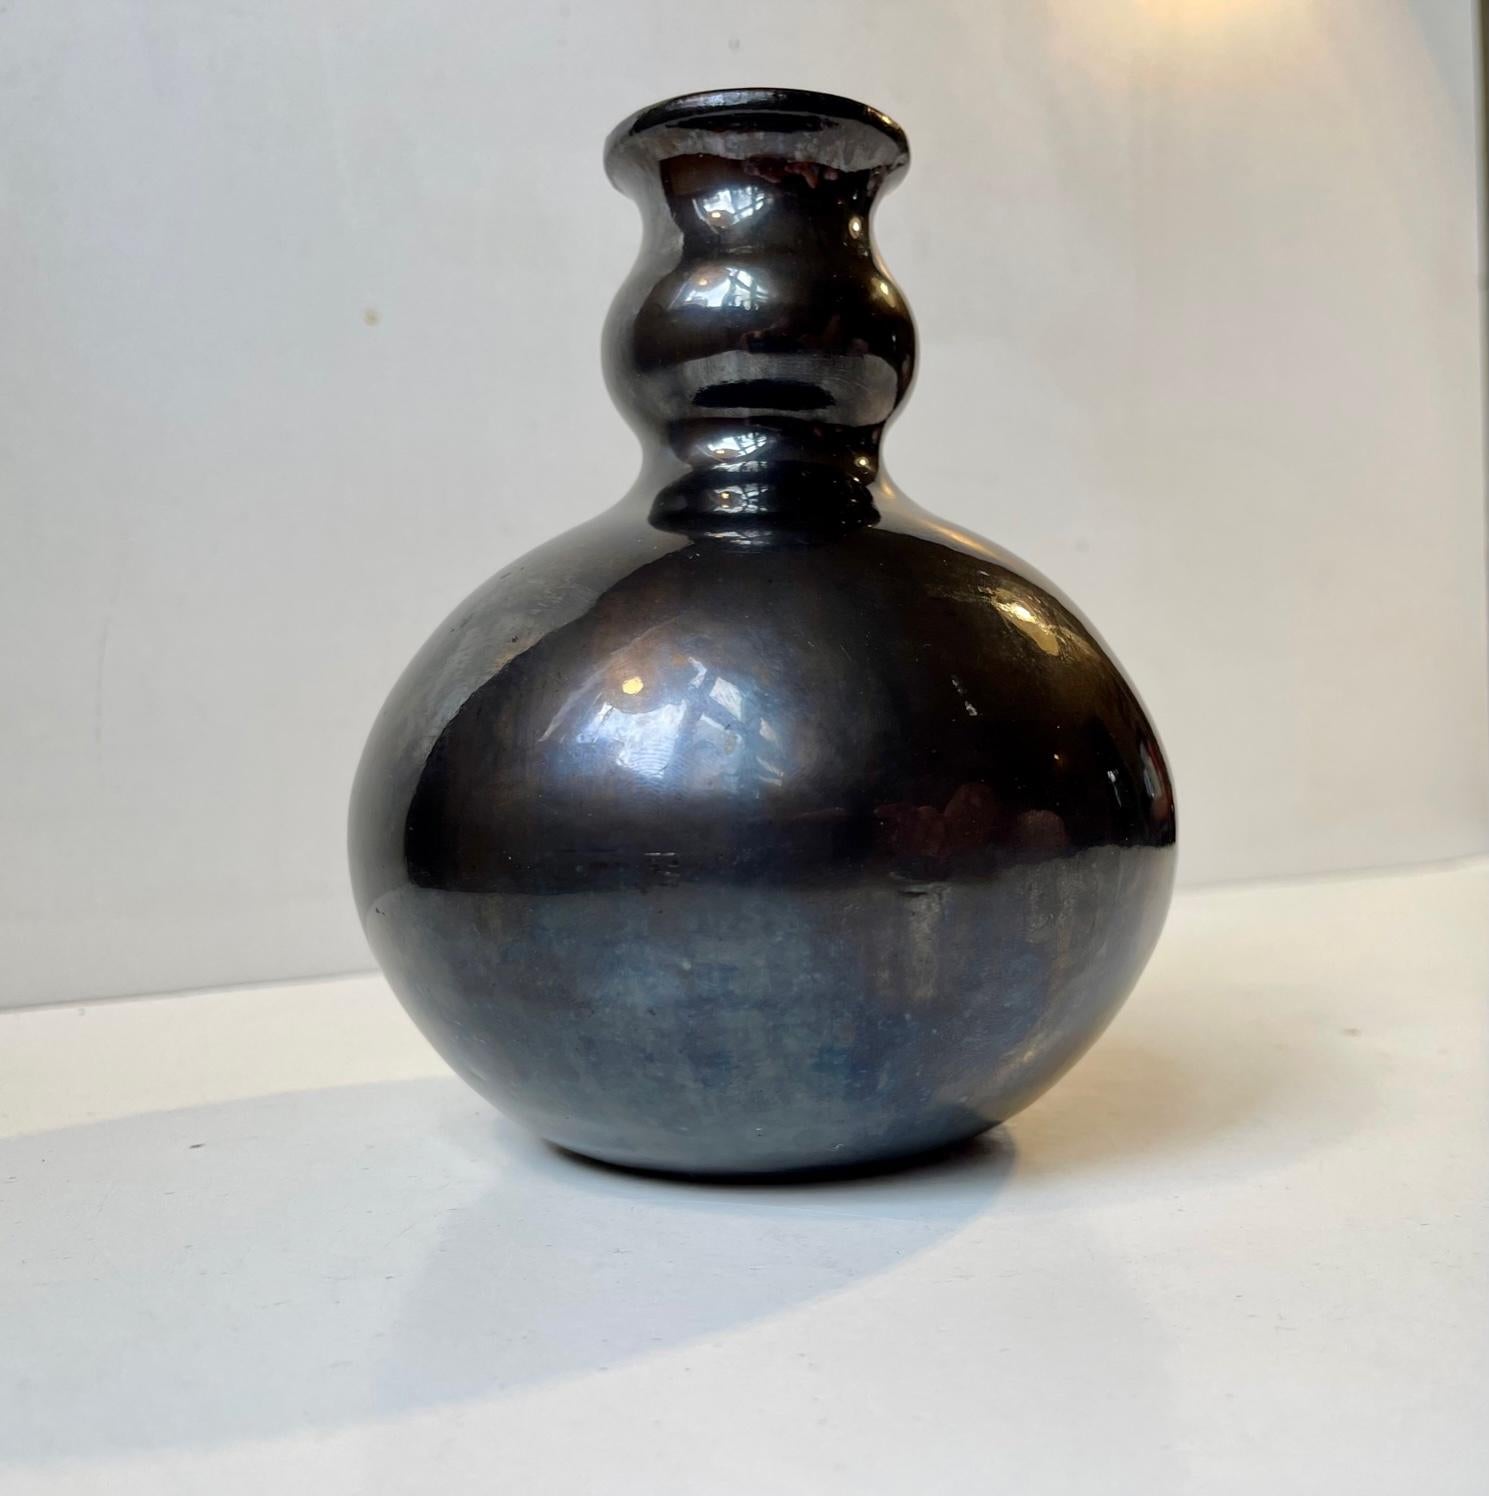 Piece unique from the workshop of Herman August Kähler. It displays a rare satin black glaze with slate mirror-like effects. It was made circa 1920-25 and has a distinct Art Deco stylings. Measurements: height is 16 cm, diameter: 12 cm.